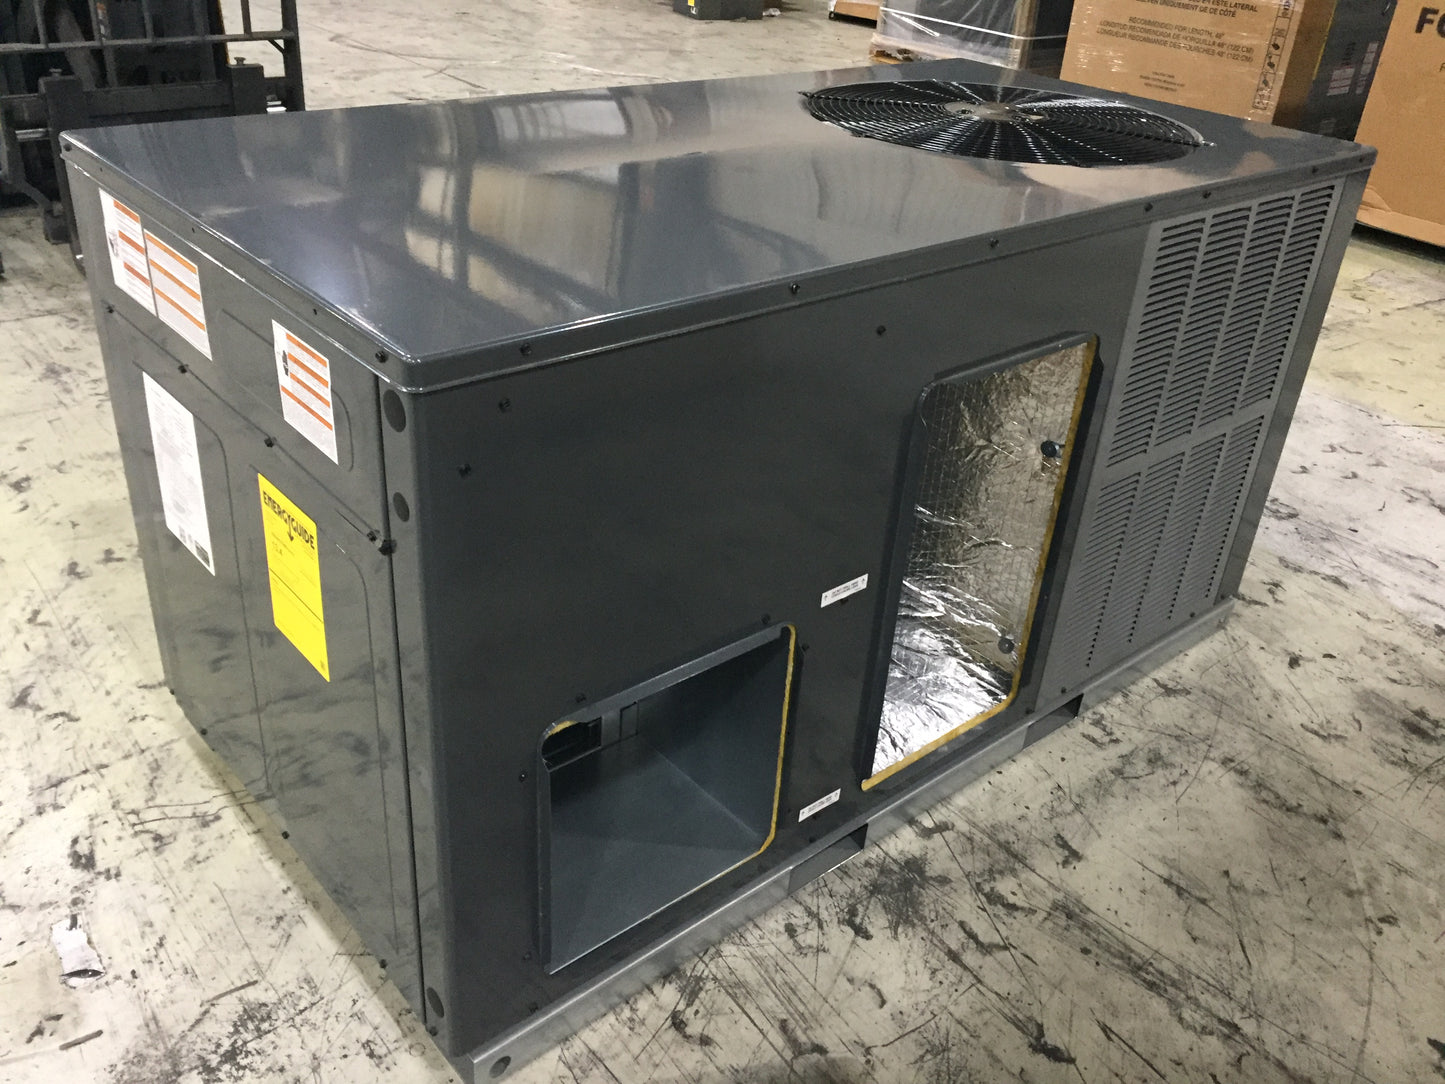 5 TON HORIZONTAL 2 STAGE PACKAGED AIR CONDITIONING UNIT, 13.4 SEER, 208-230/60/1, R-410A